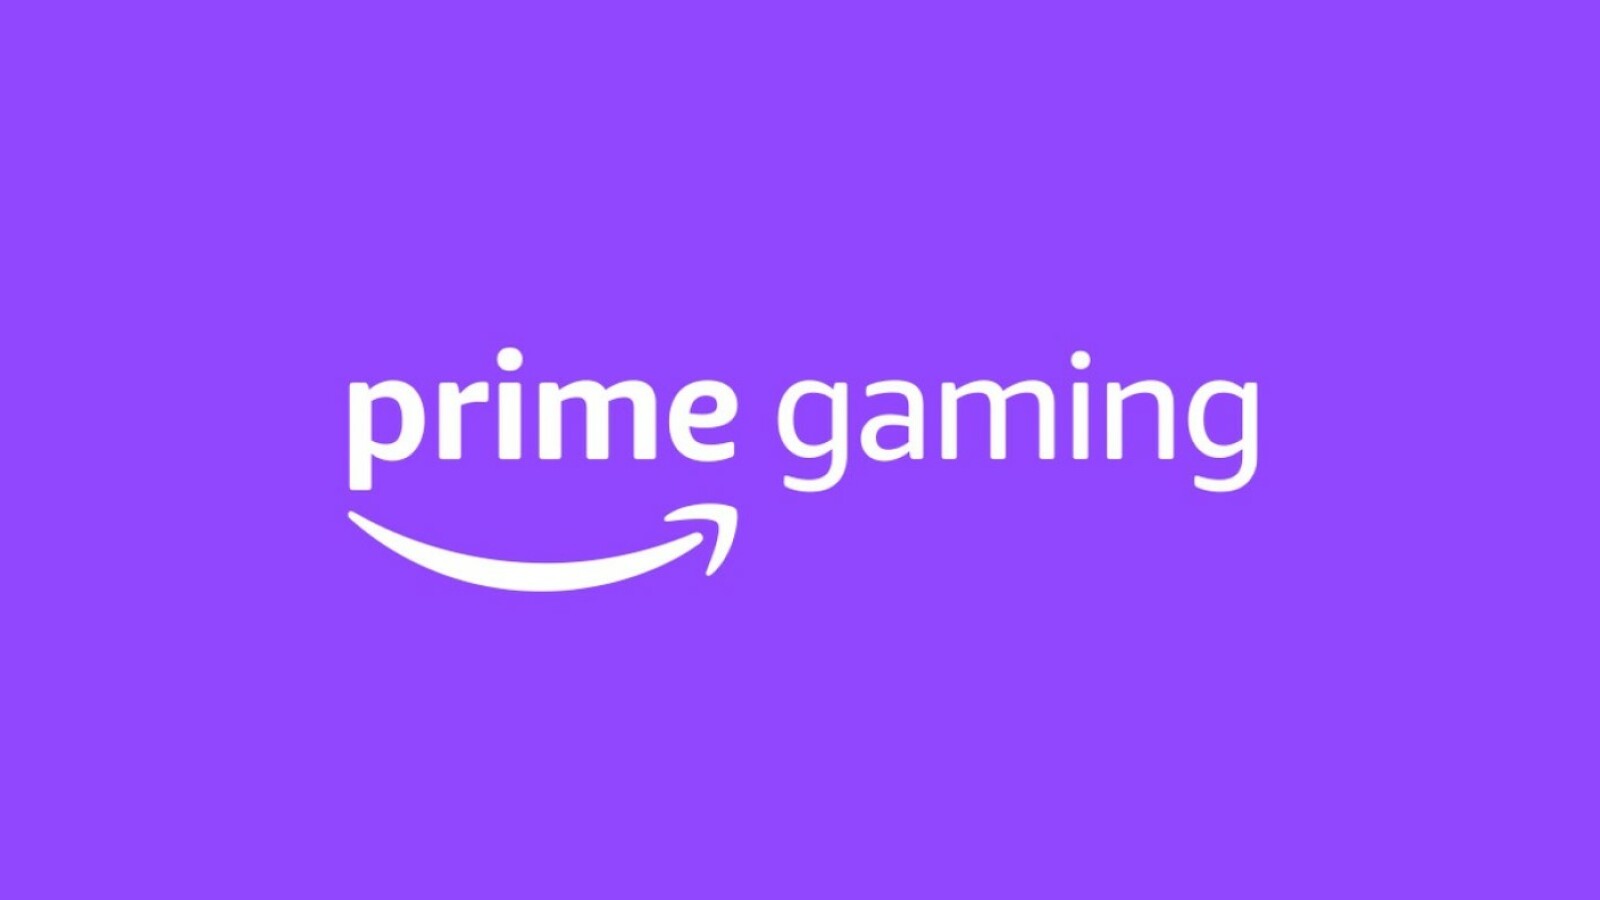 Free PC Games with Prime Gaming in June: You can get these 13 games for free